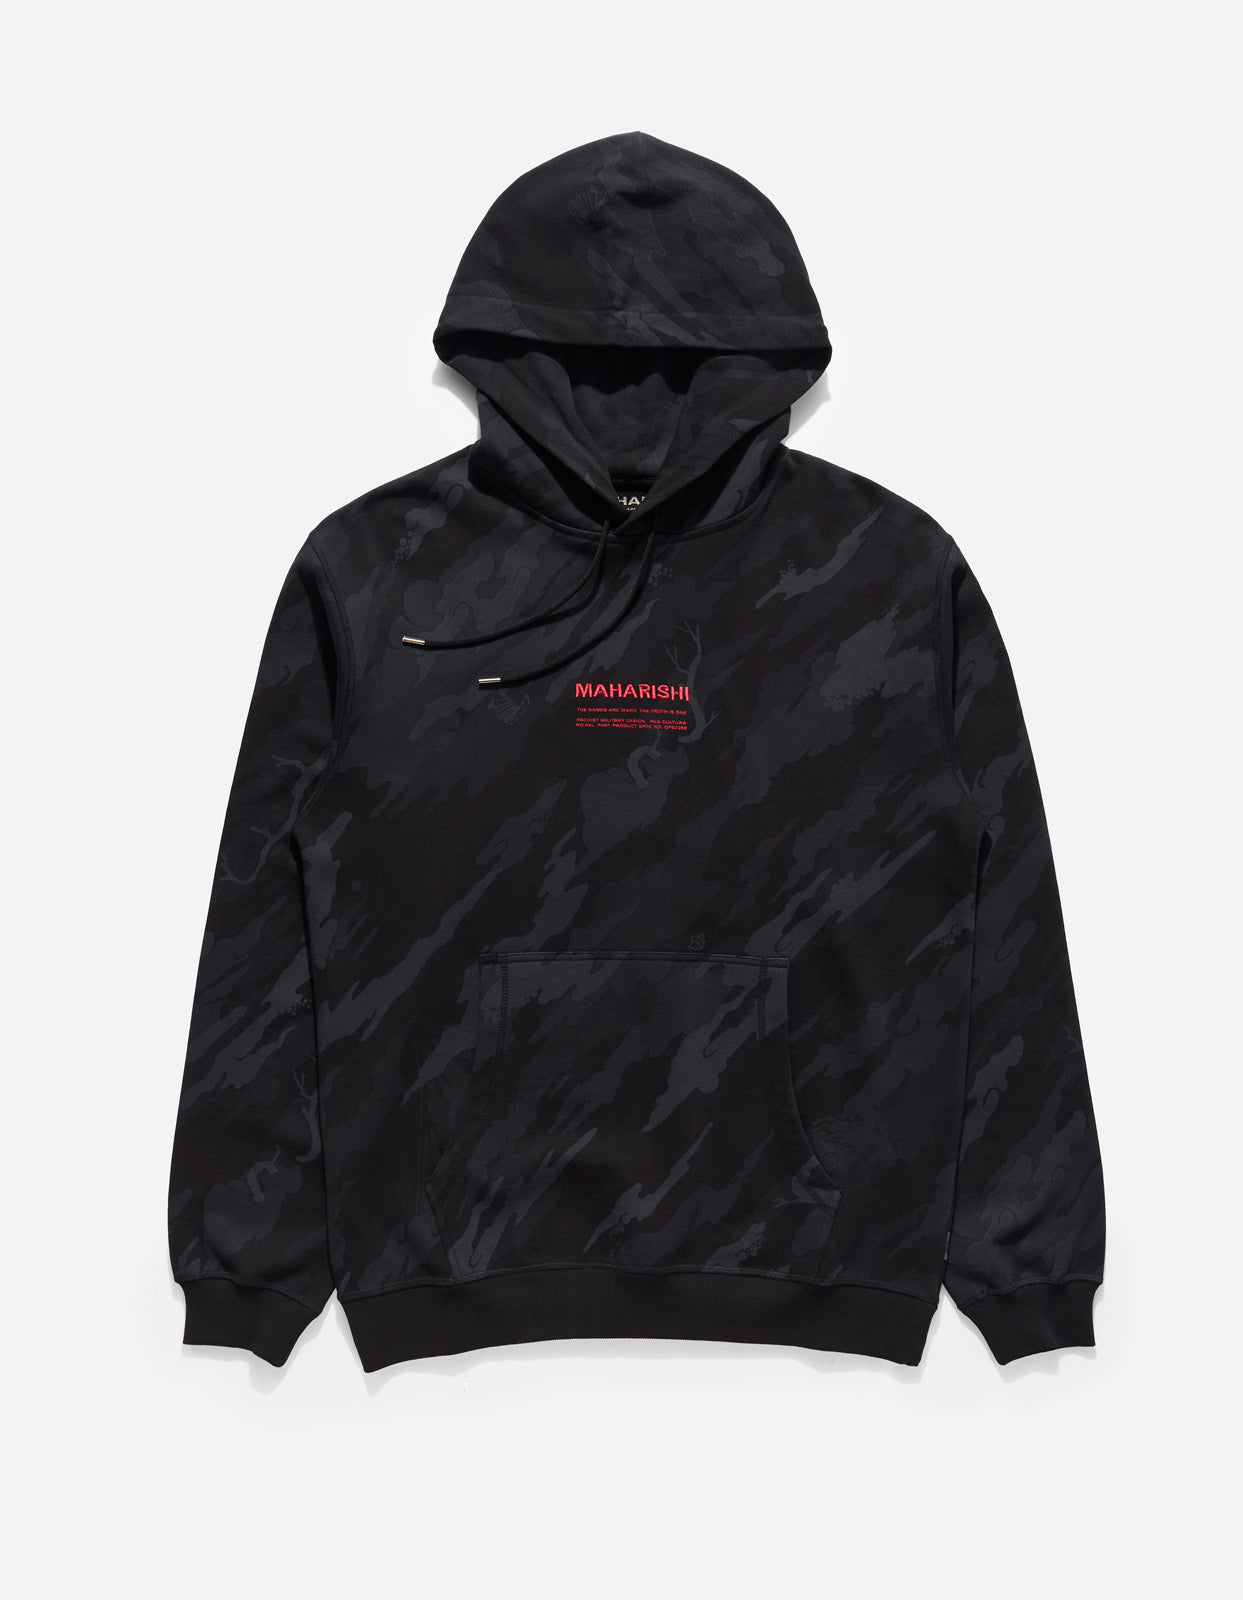 Maharishi | DPM: Bonsai Forest MILTYPE Embroidered Hooded Sweat Subdued ...